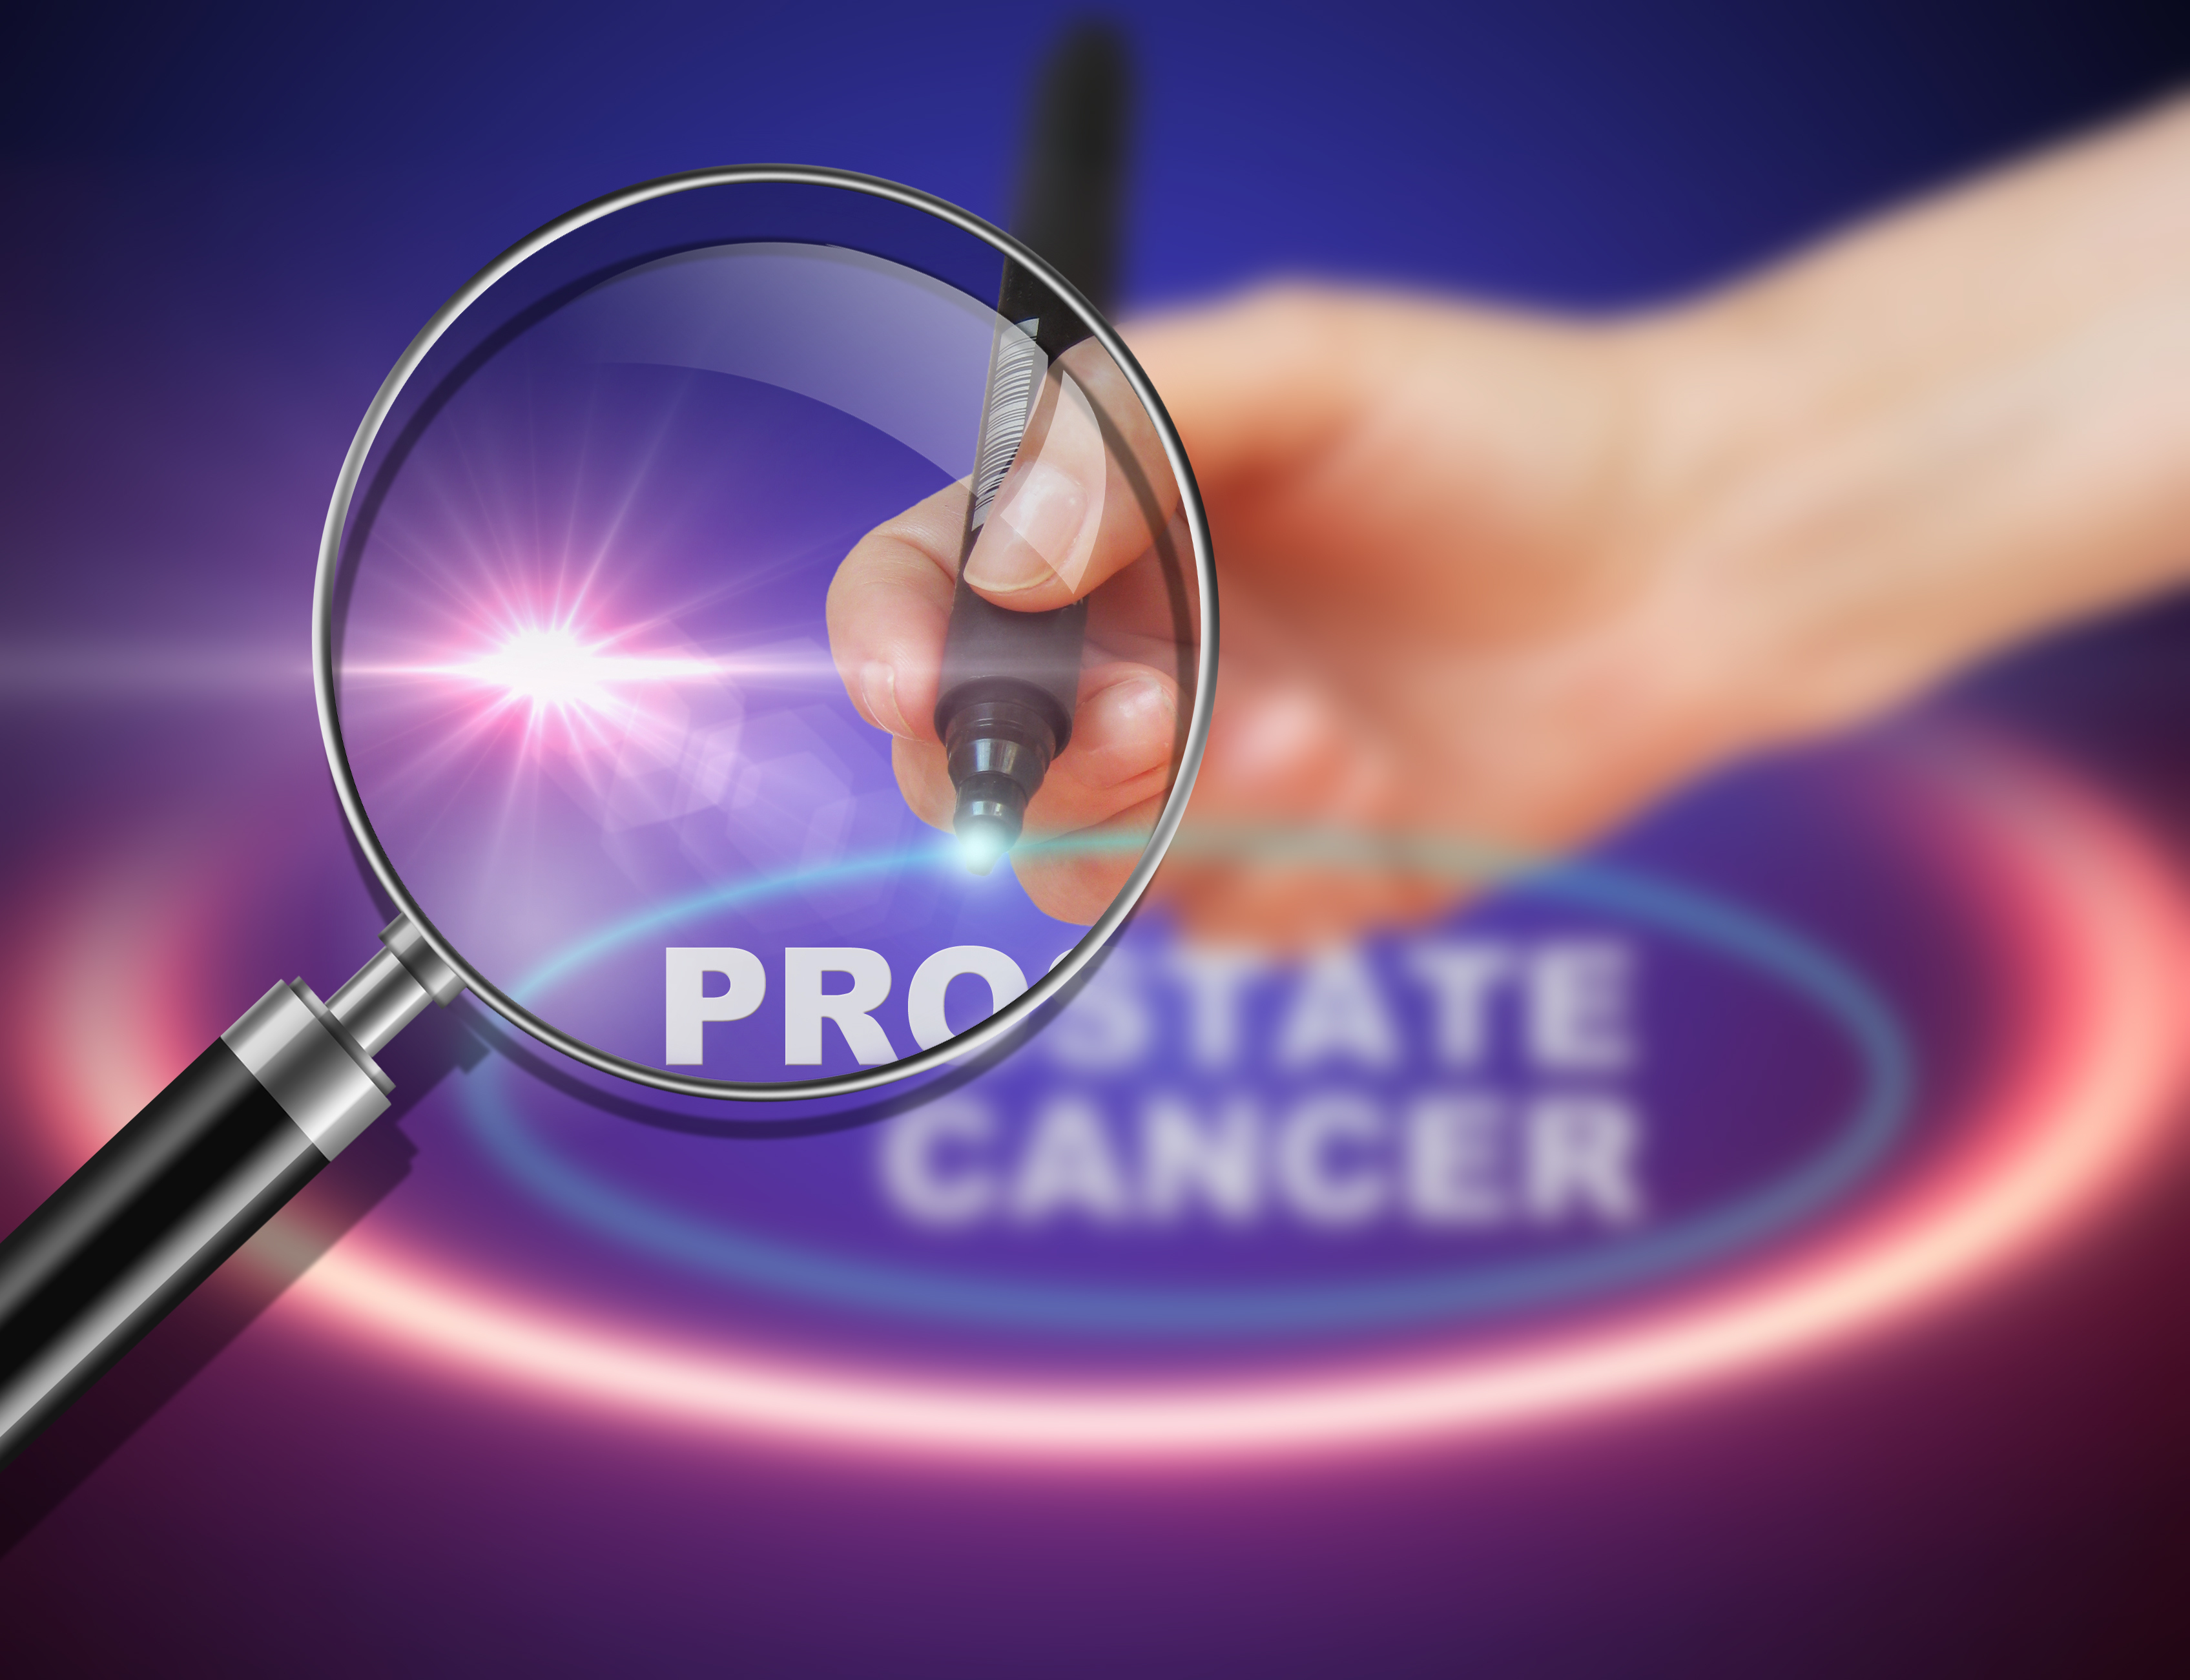 writing word  PROSTATE CANCER with marker on gradient background made in 2d software